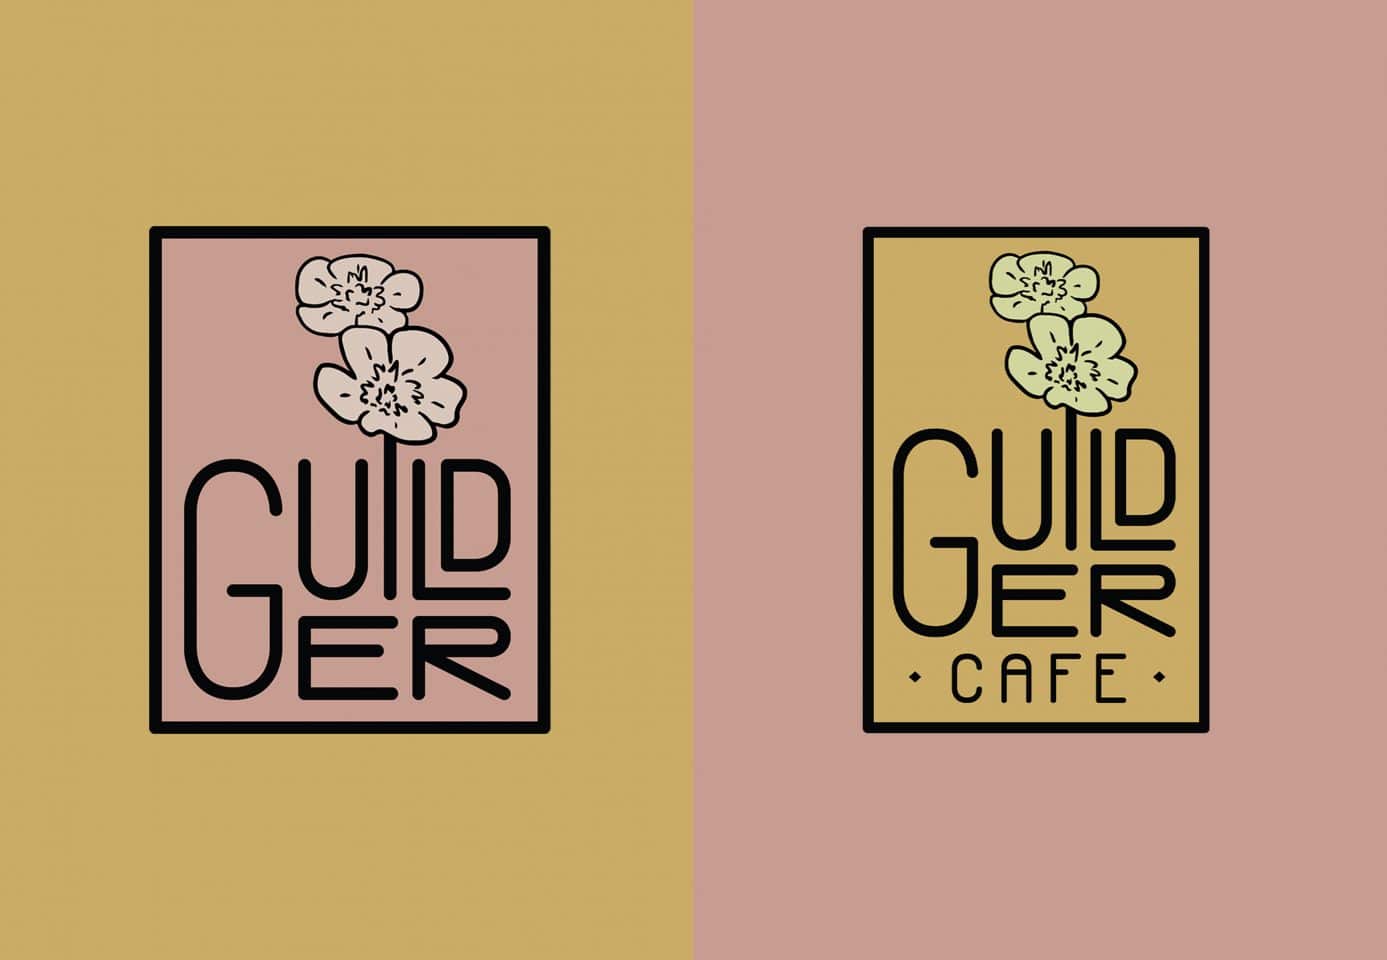 Guilder logo has a pink and gold version.